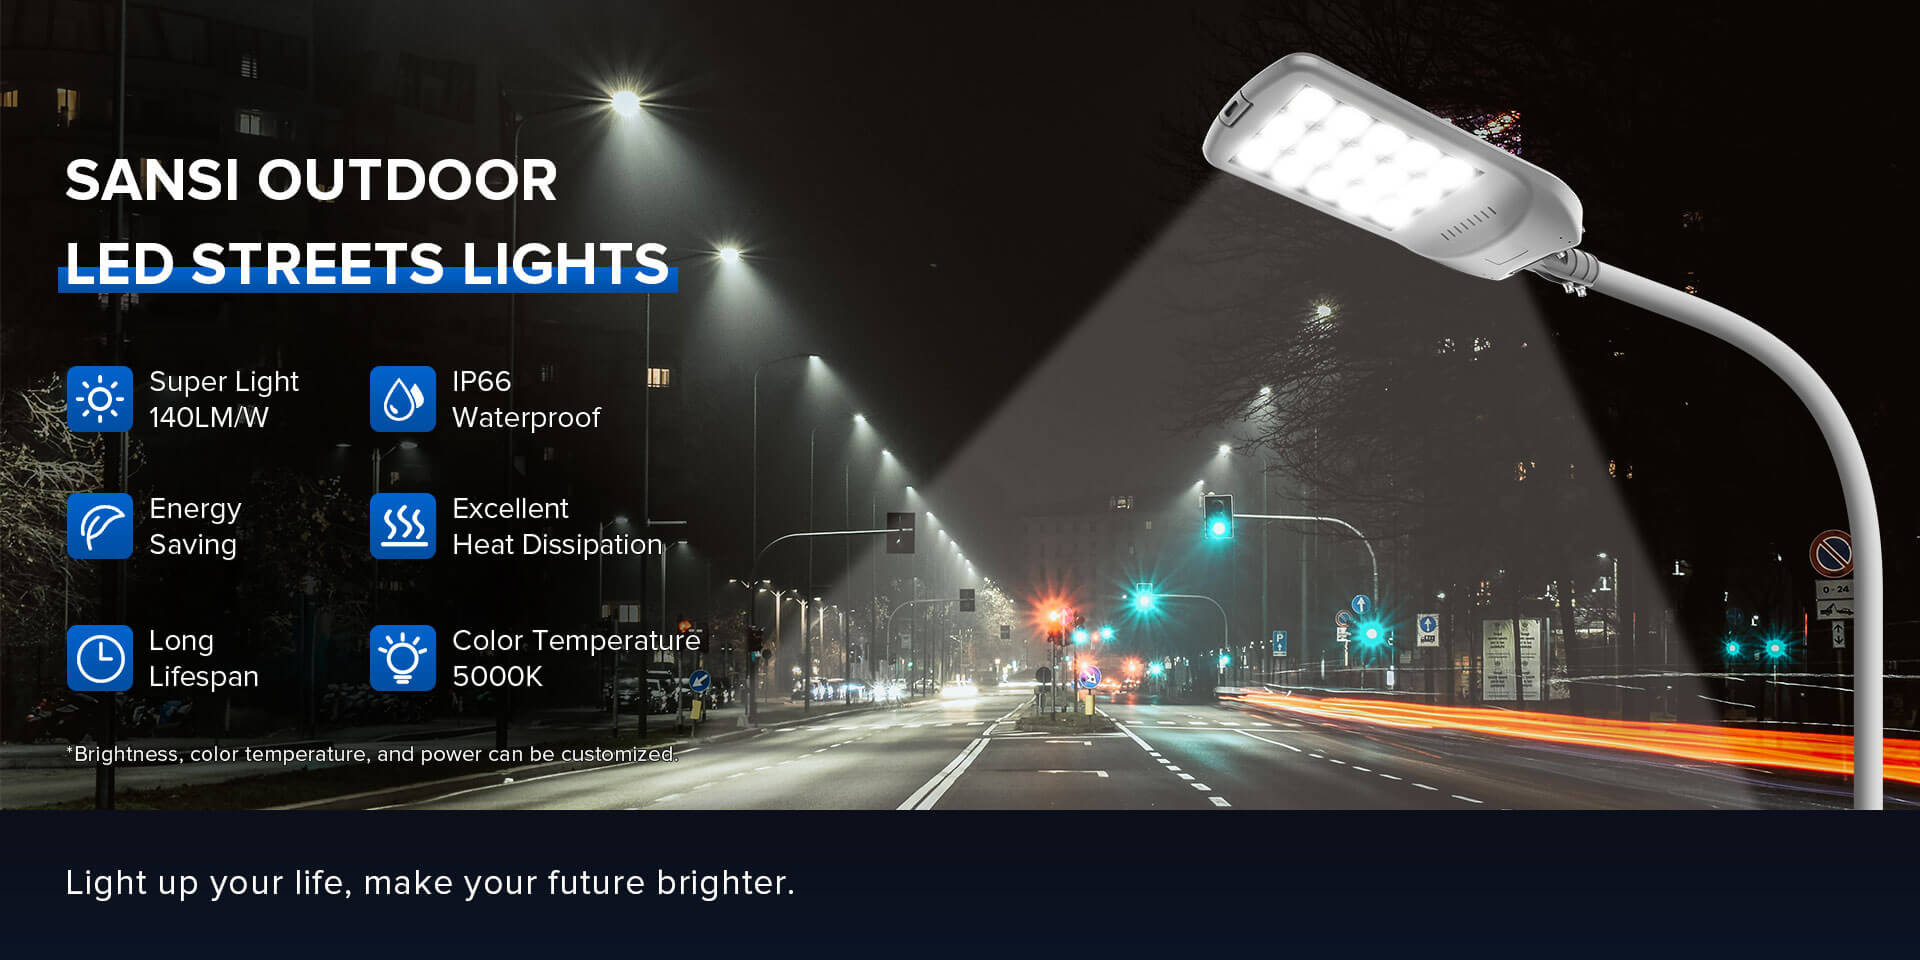 SANSI OUTDOOR LED STREETS LIGHTS, Light up your life, make your future brighter.